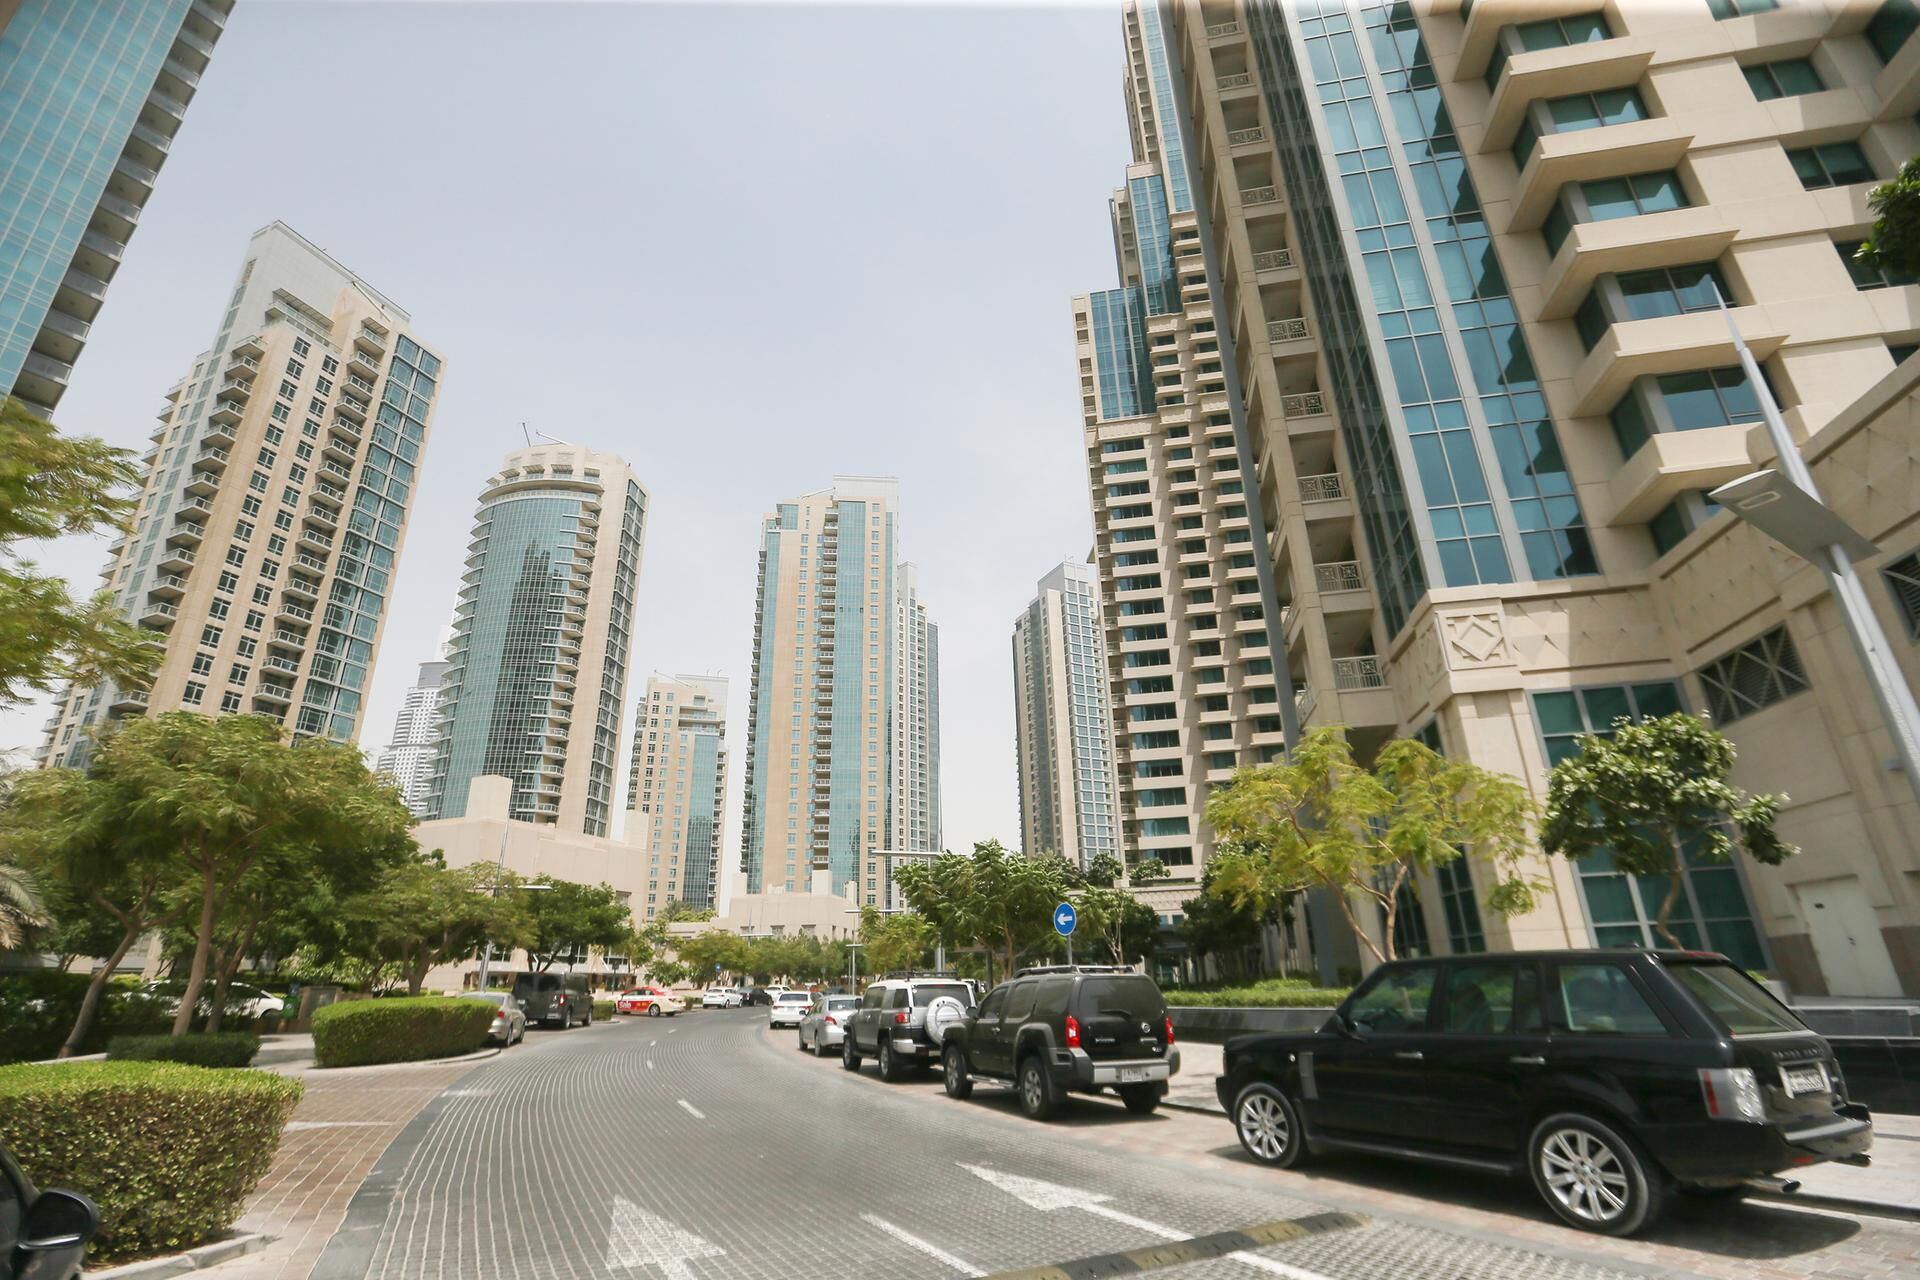 China S Appetite For Dubai Property Grows Amid Strengthening Of Sino Uae Ties